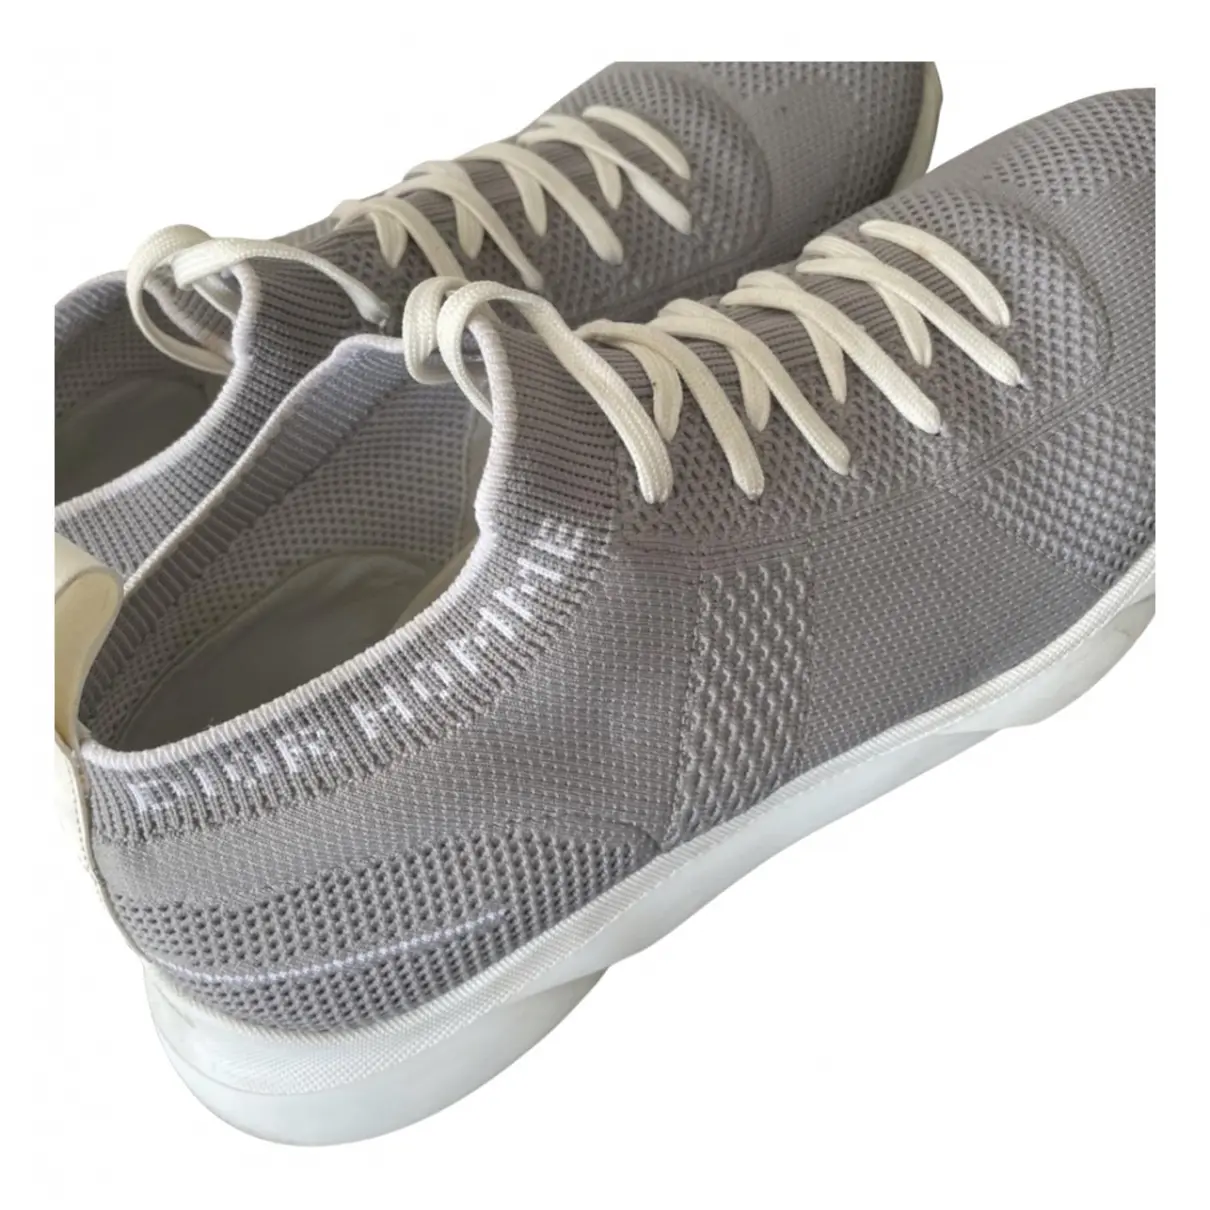 Buy Dior Homme B28 cloth high trainers online